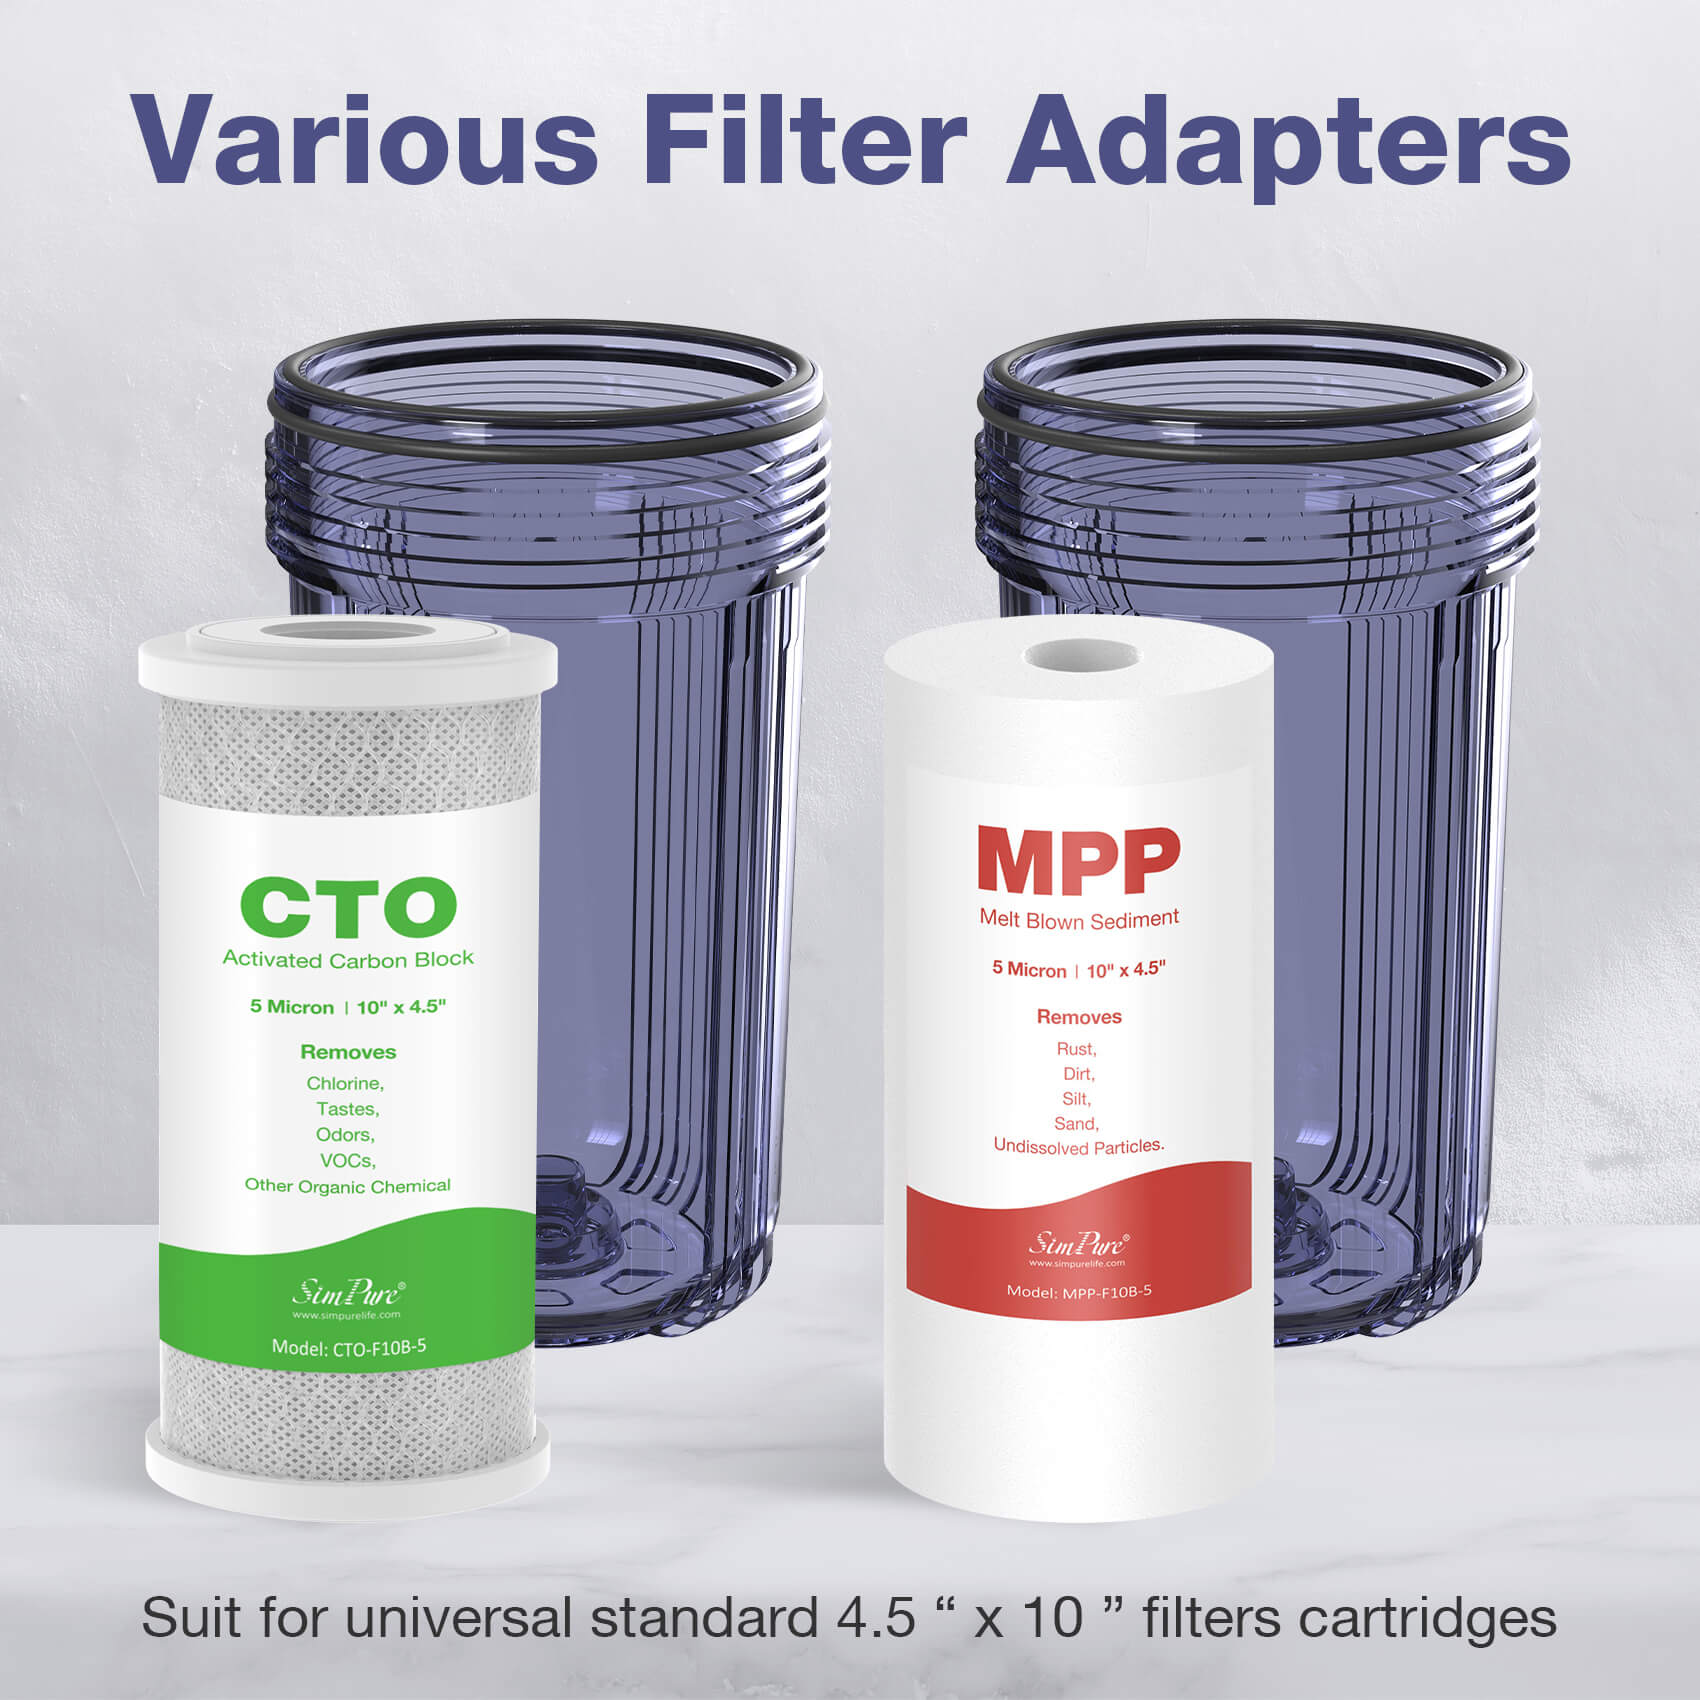 SimPure DB10C-2 5 Micron 2-Stage Whole House Water Filtration System with 4.5 x 10 inch Sediment and Carbon Block Filters